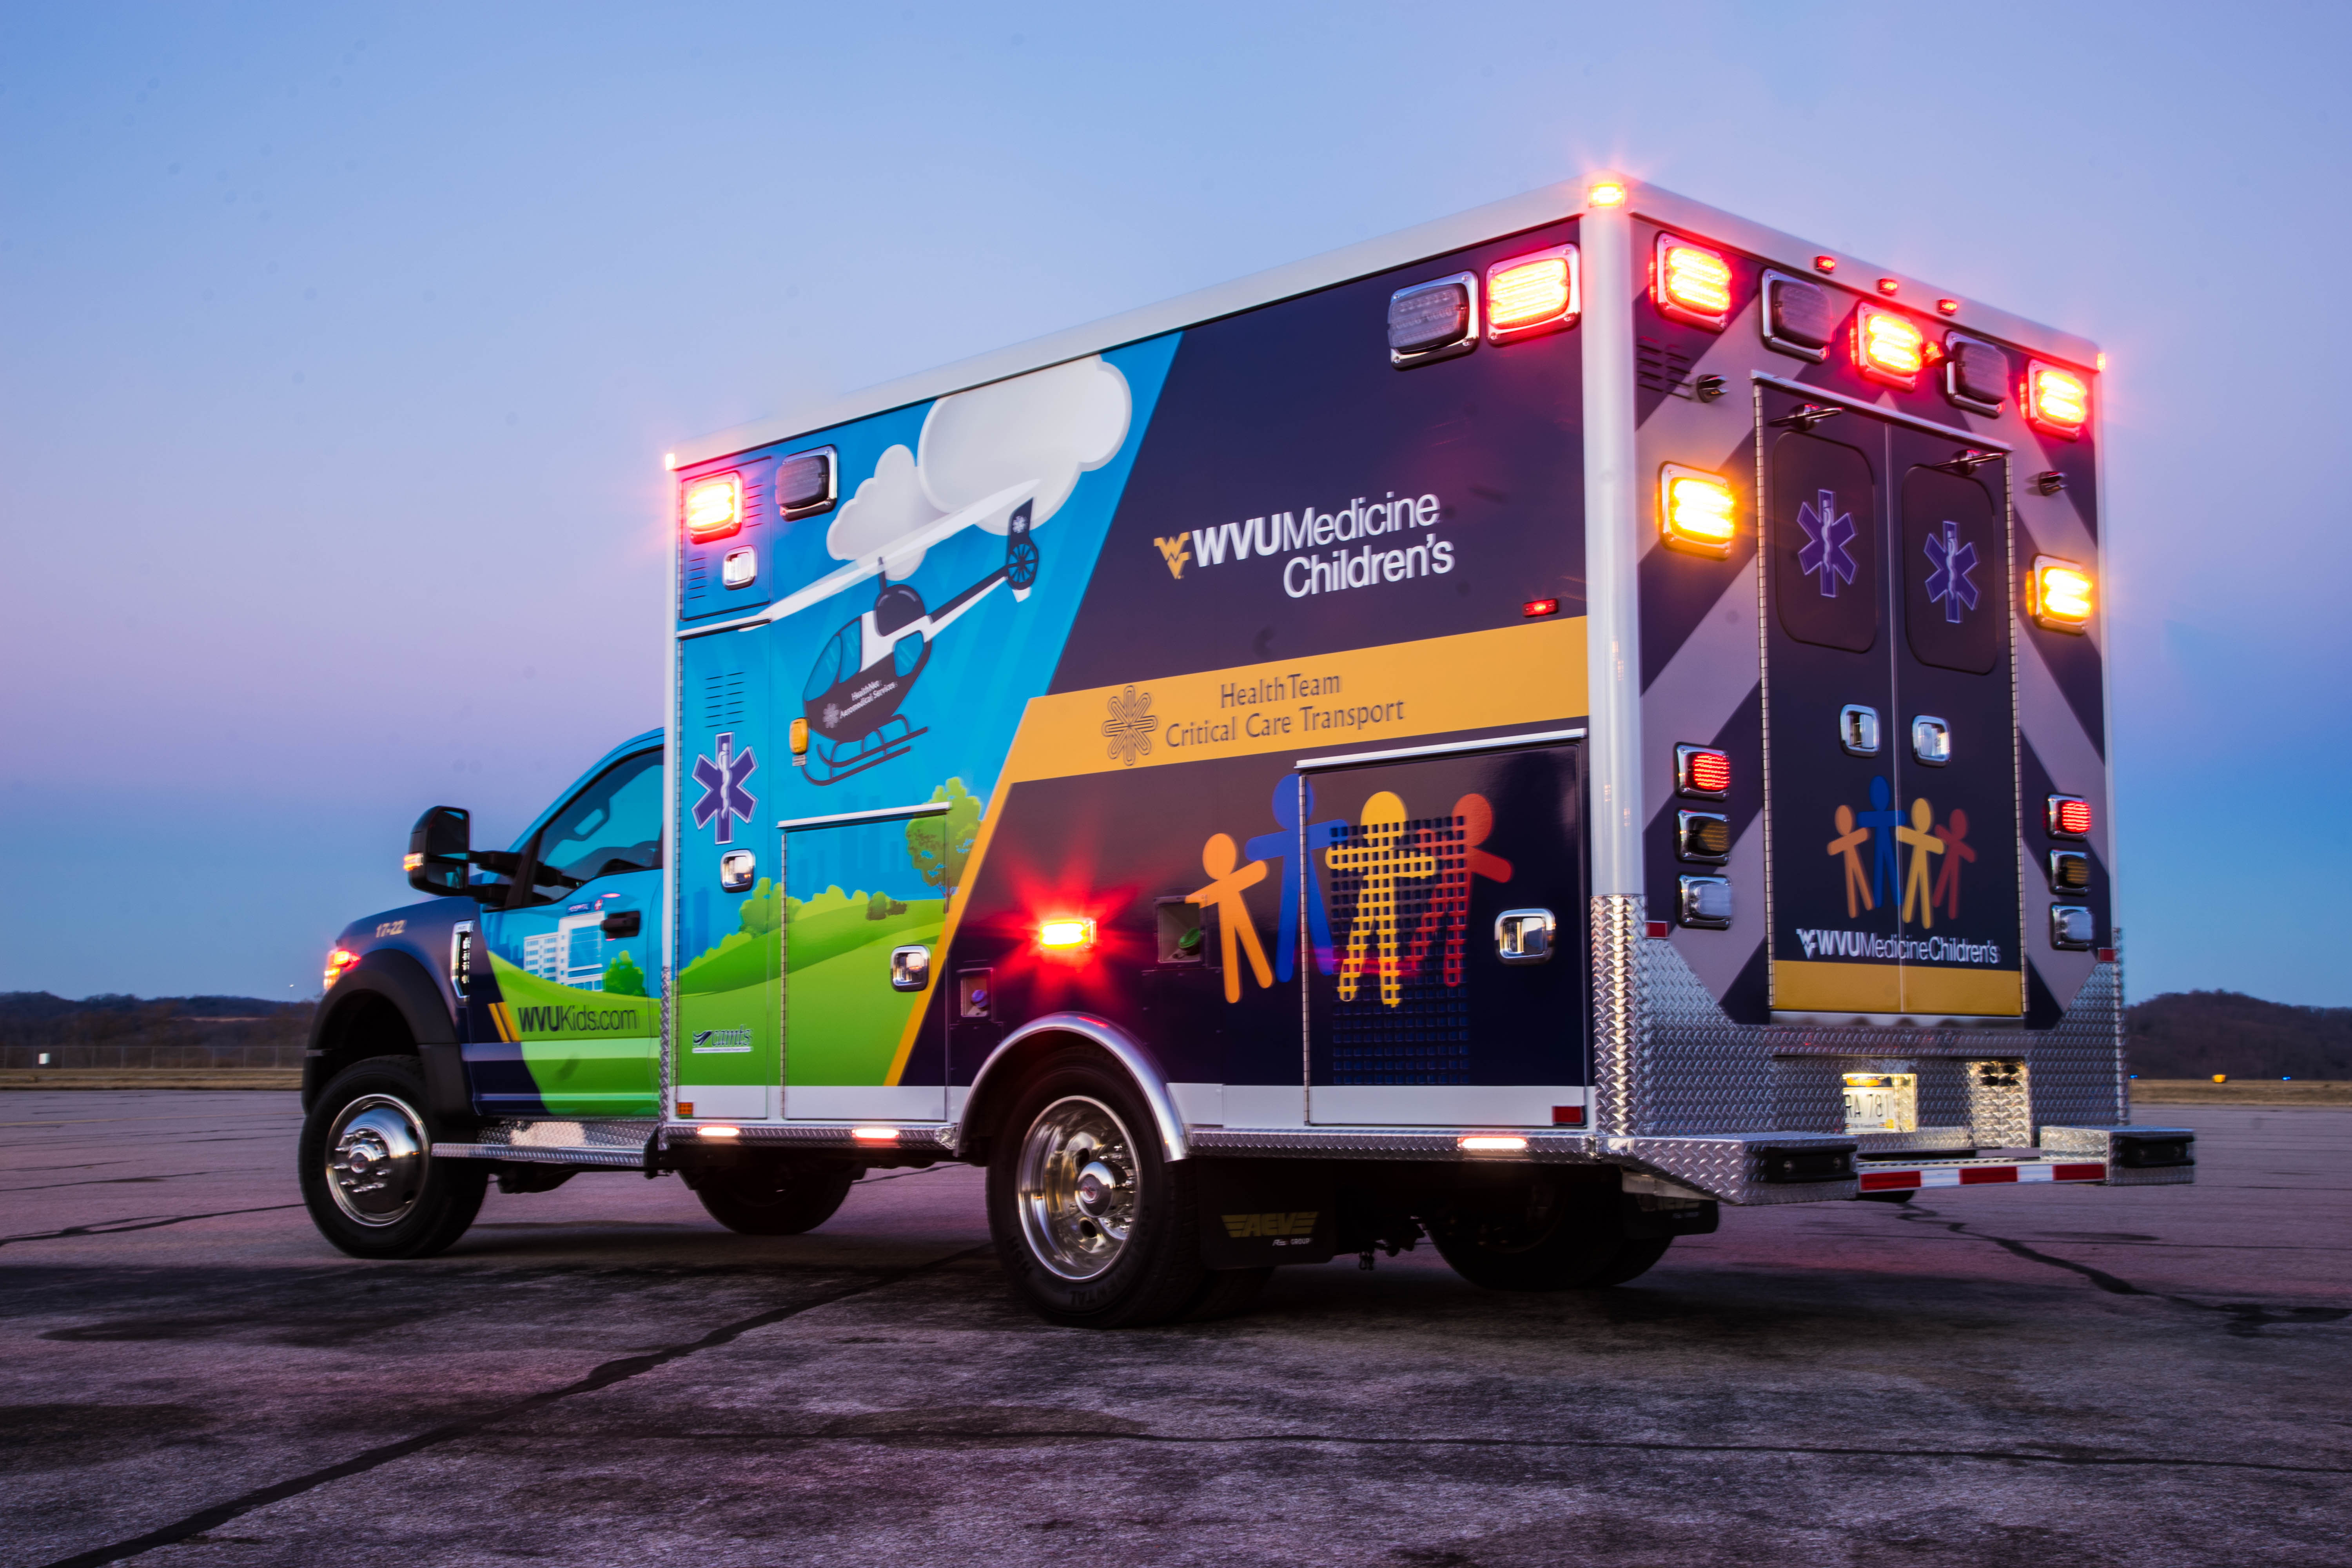 AN image of WVU Children's ambulance by HealthTeam Critical Care Transport